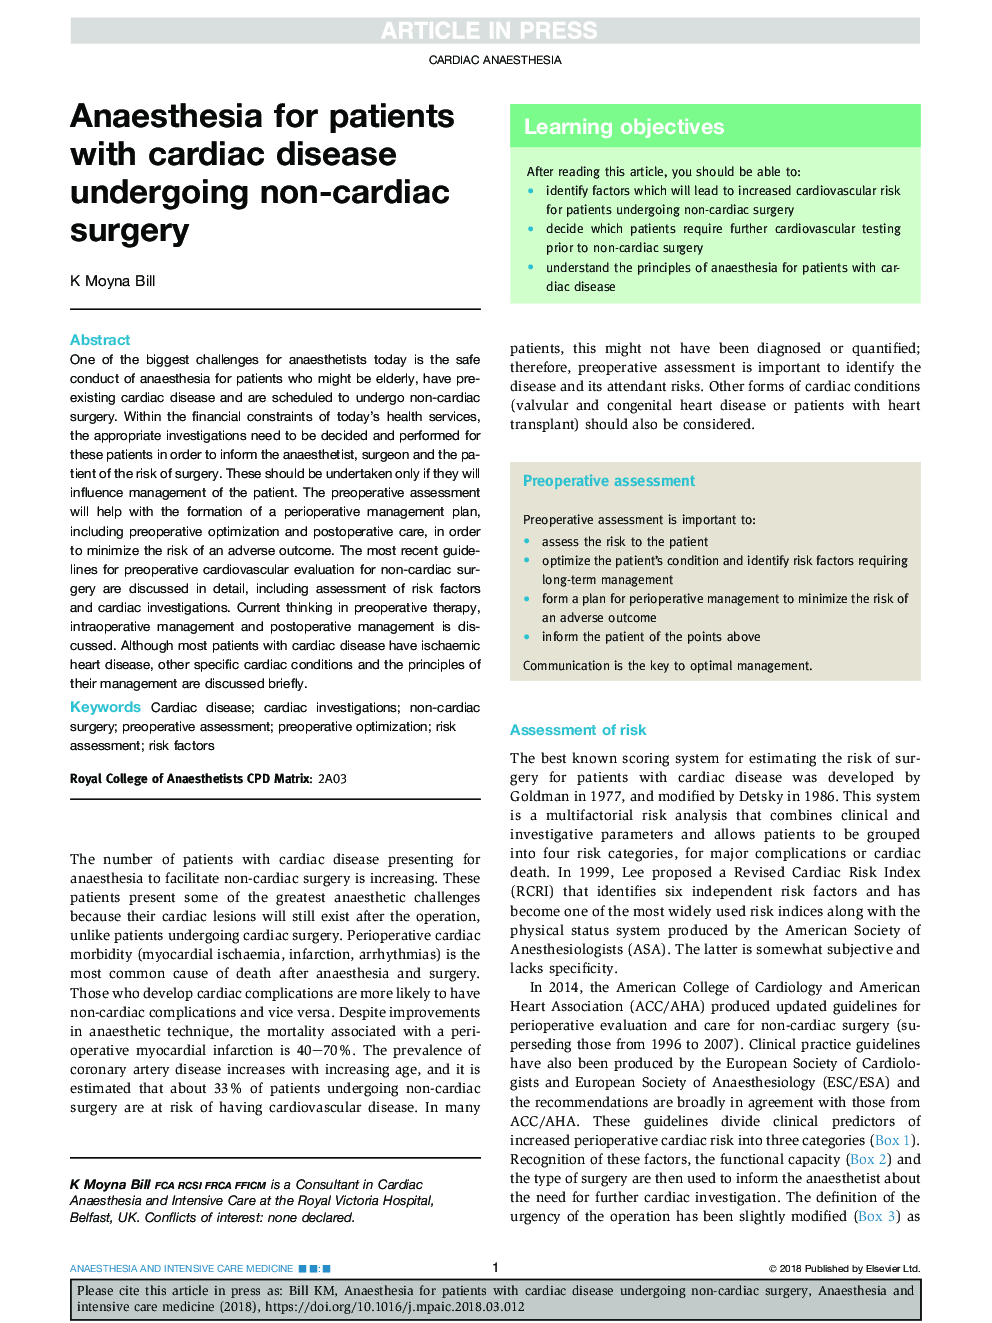 Anaesthesia for patients with cardiac disease undergoing non-cardiac surgery